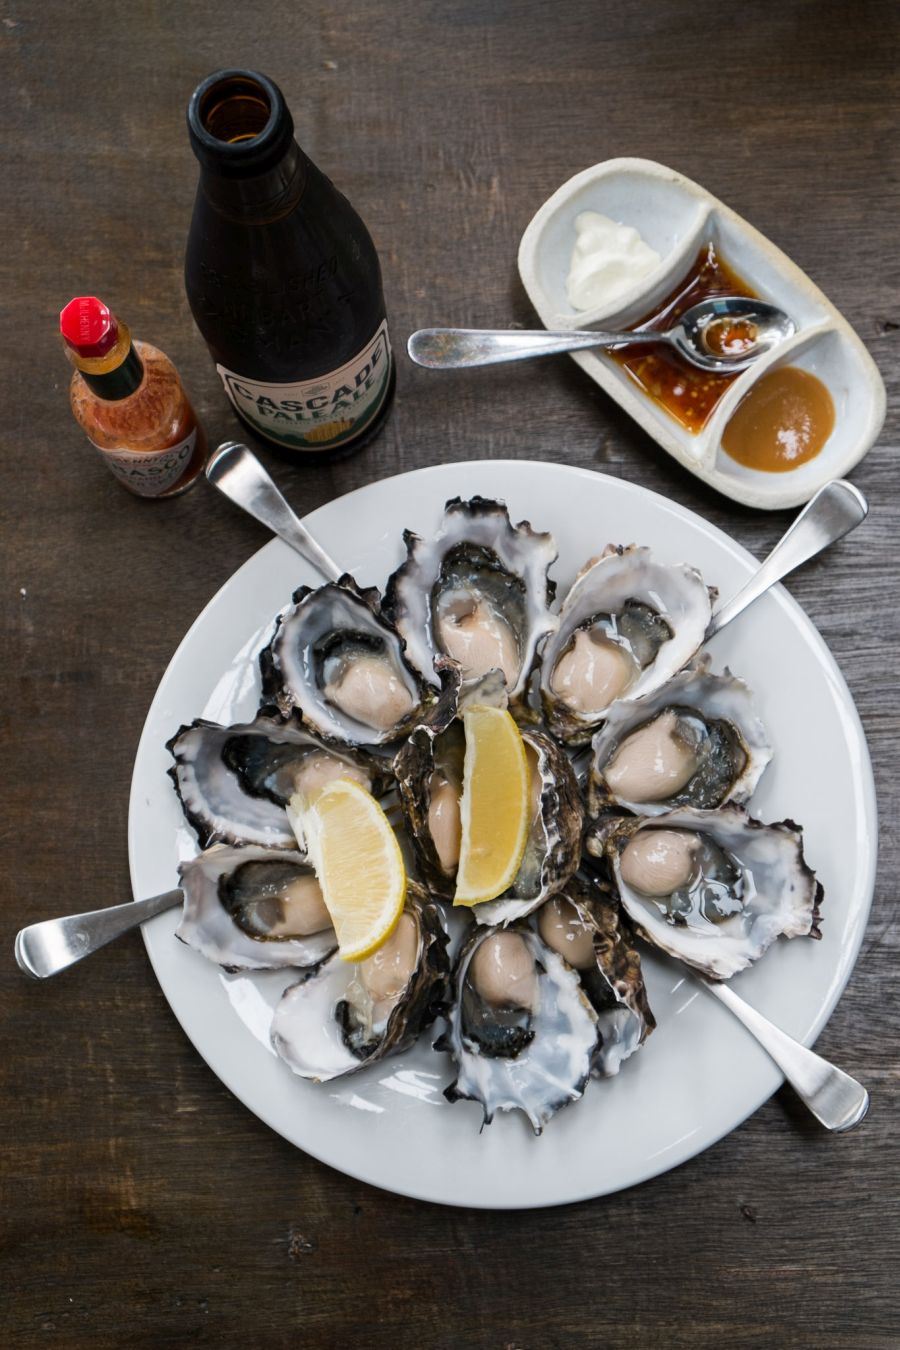 A dozen Bruny Island oysters with the three dressings of the day: miso, wasabi cream, Asian fusion: soy, rice vinegar, chilli, spring onion, sunflower oil and more